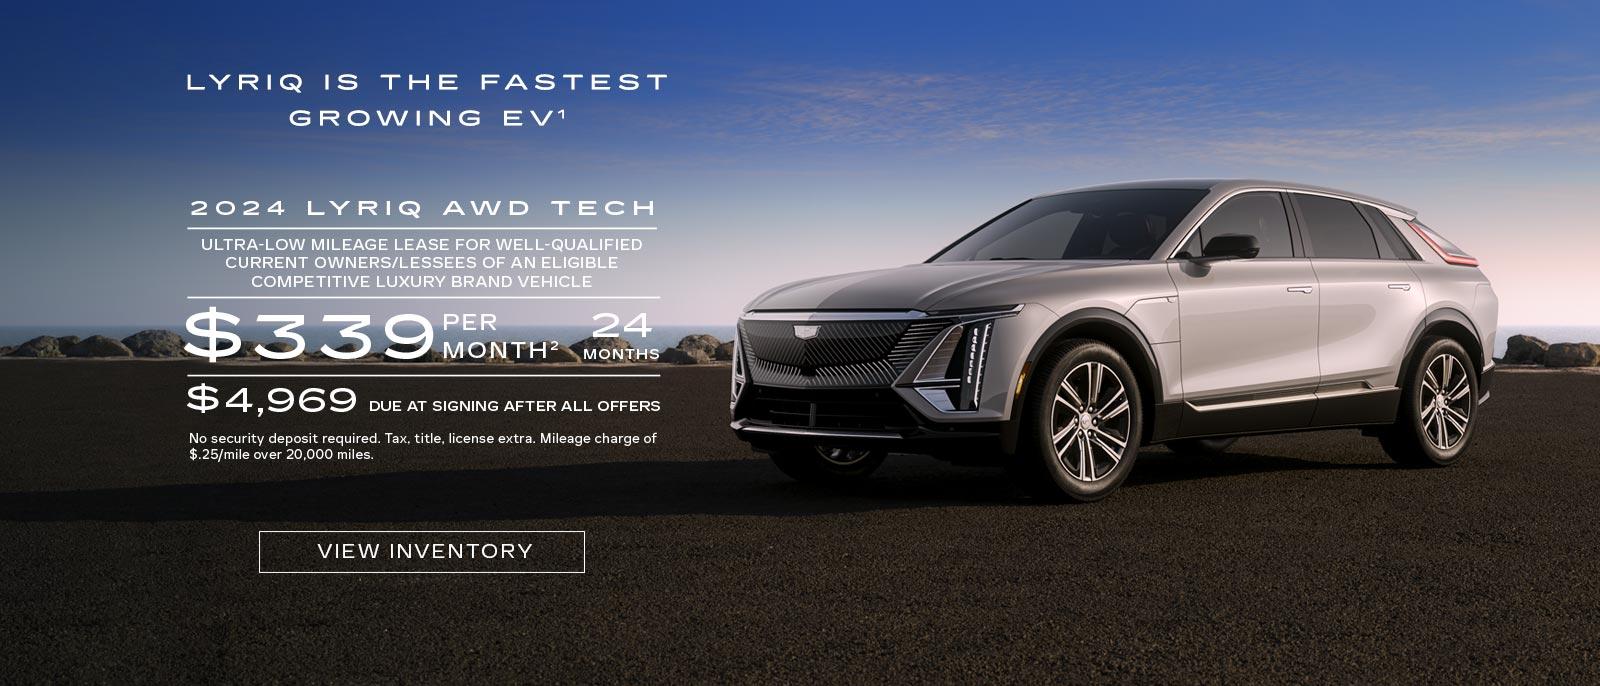 2024 LYRIQ AWD TECH 1. Ultra-low mileage lease for well-qualified current eligible non-GM lessees. $339 per month. 24 months. $4,969 due at signing after all offers.